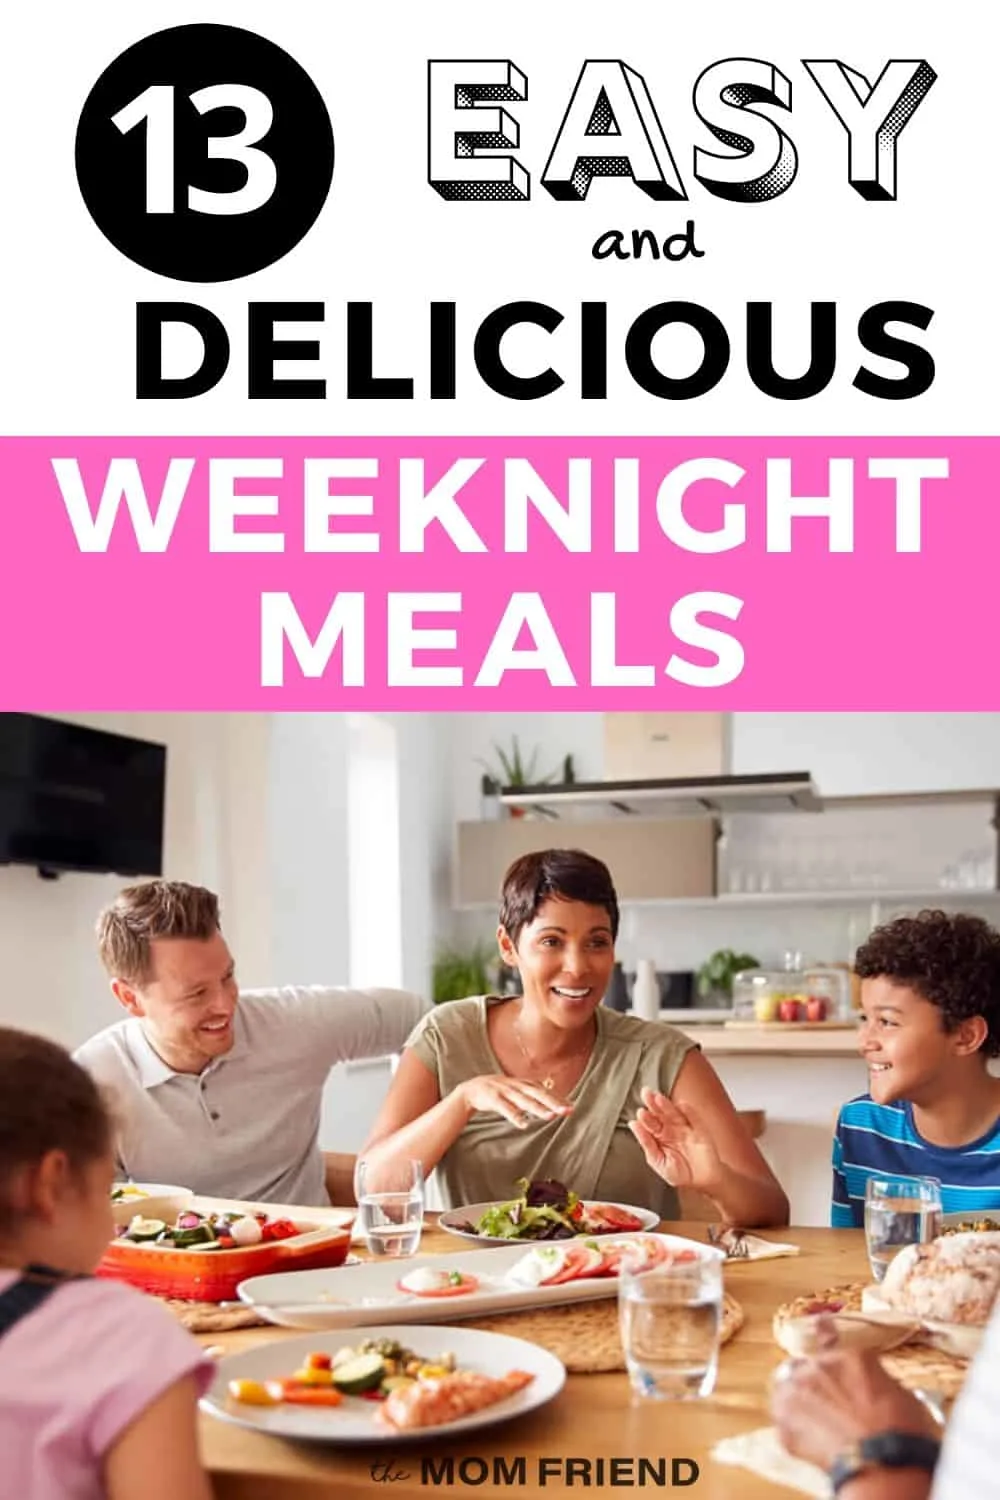 picture of family eating dinner and text 13 easy and delicious weeknight meals